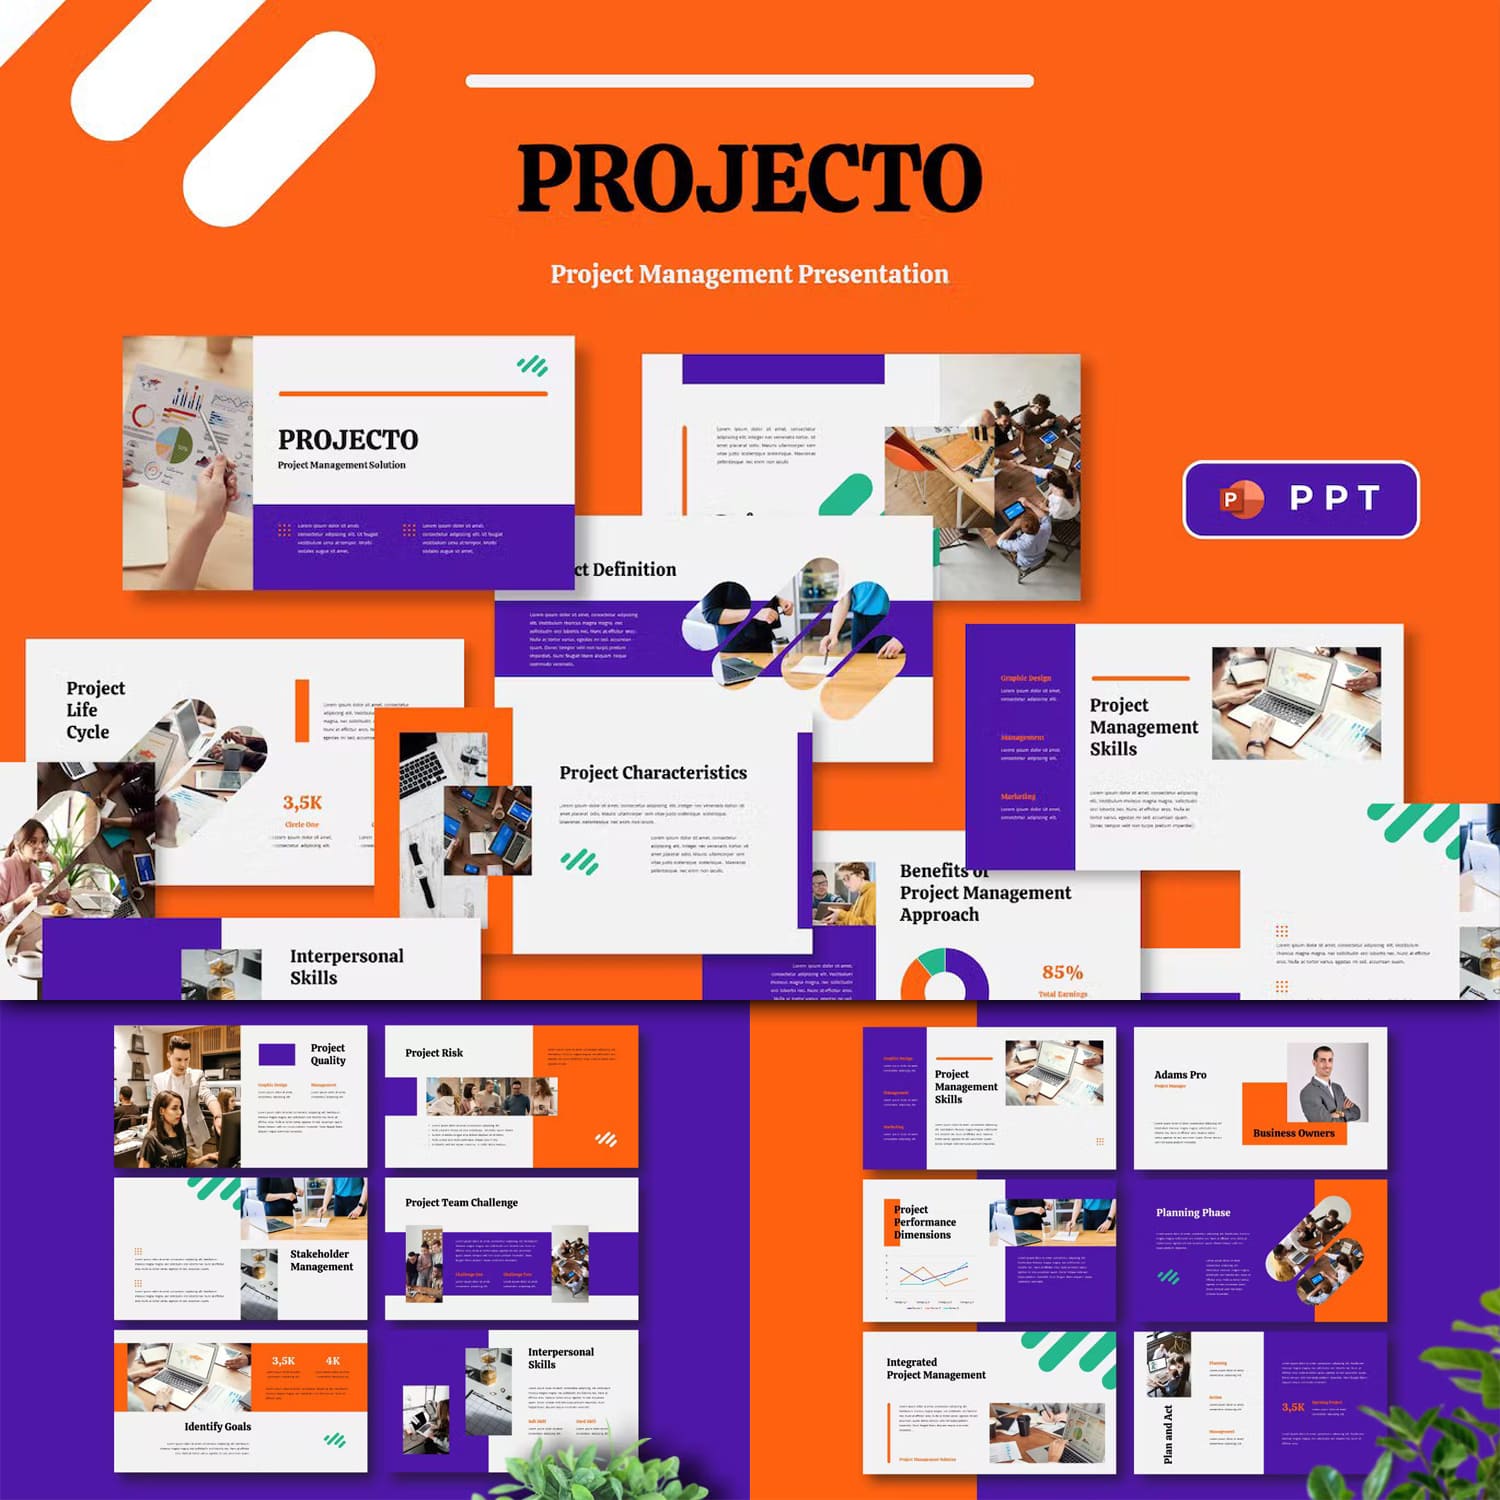 Projecto project management powerpoint template - main image preview.